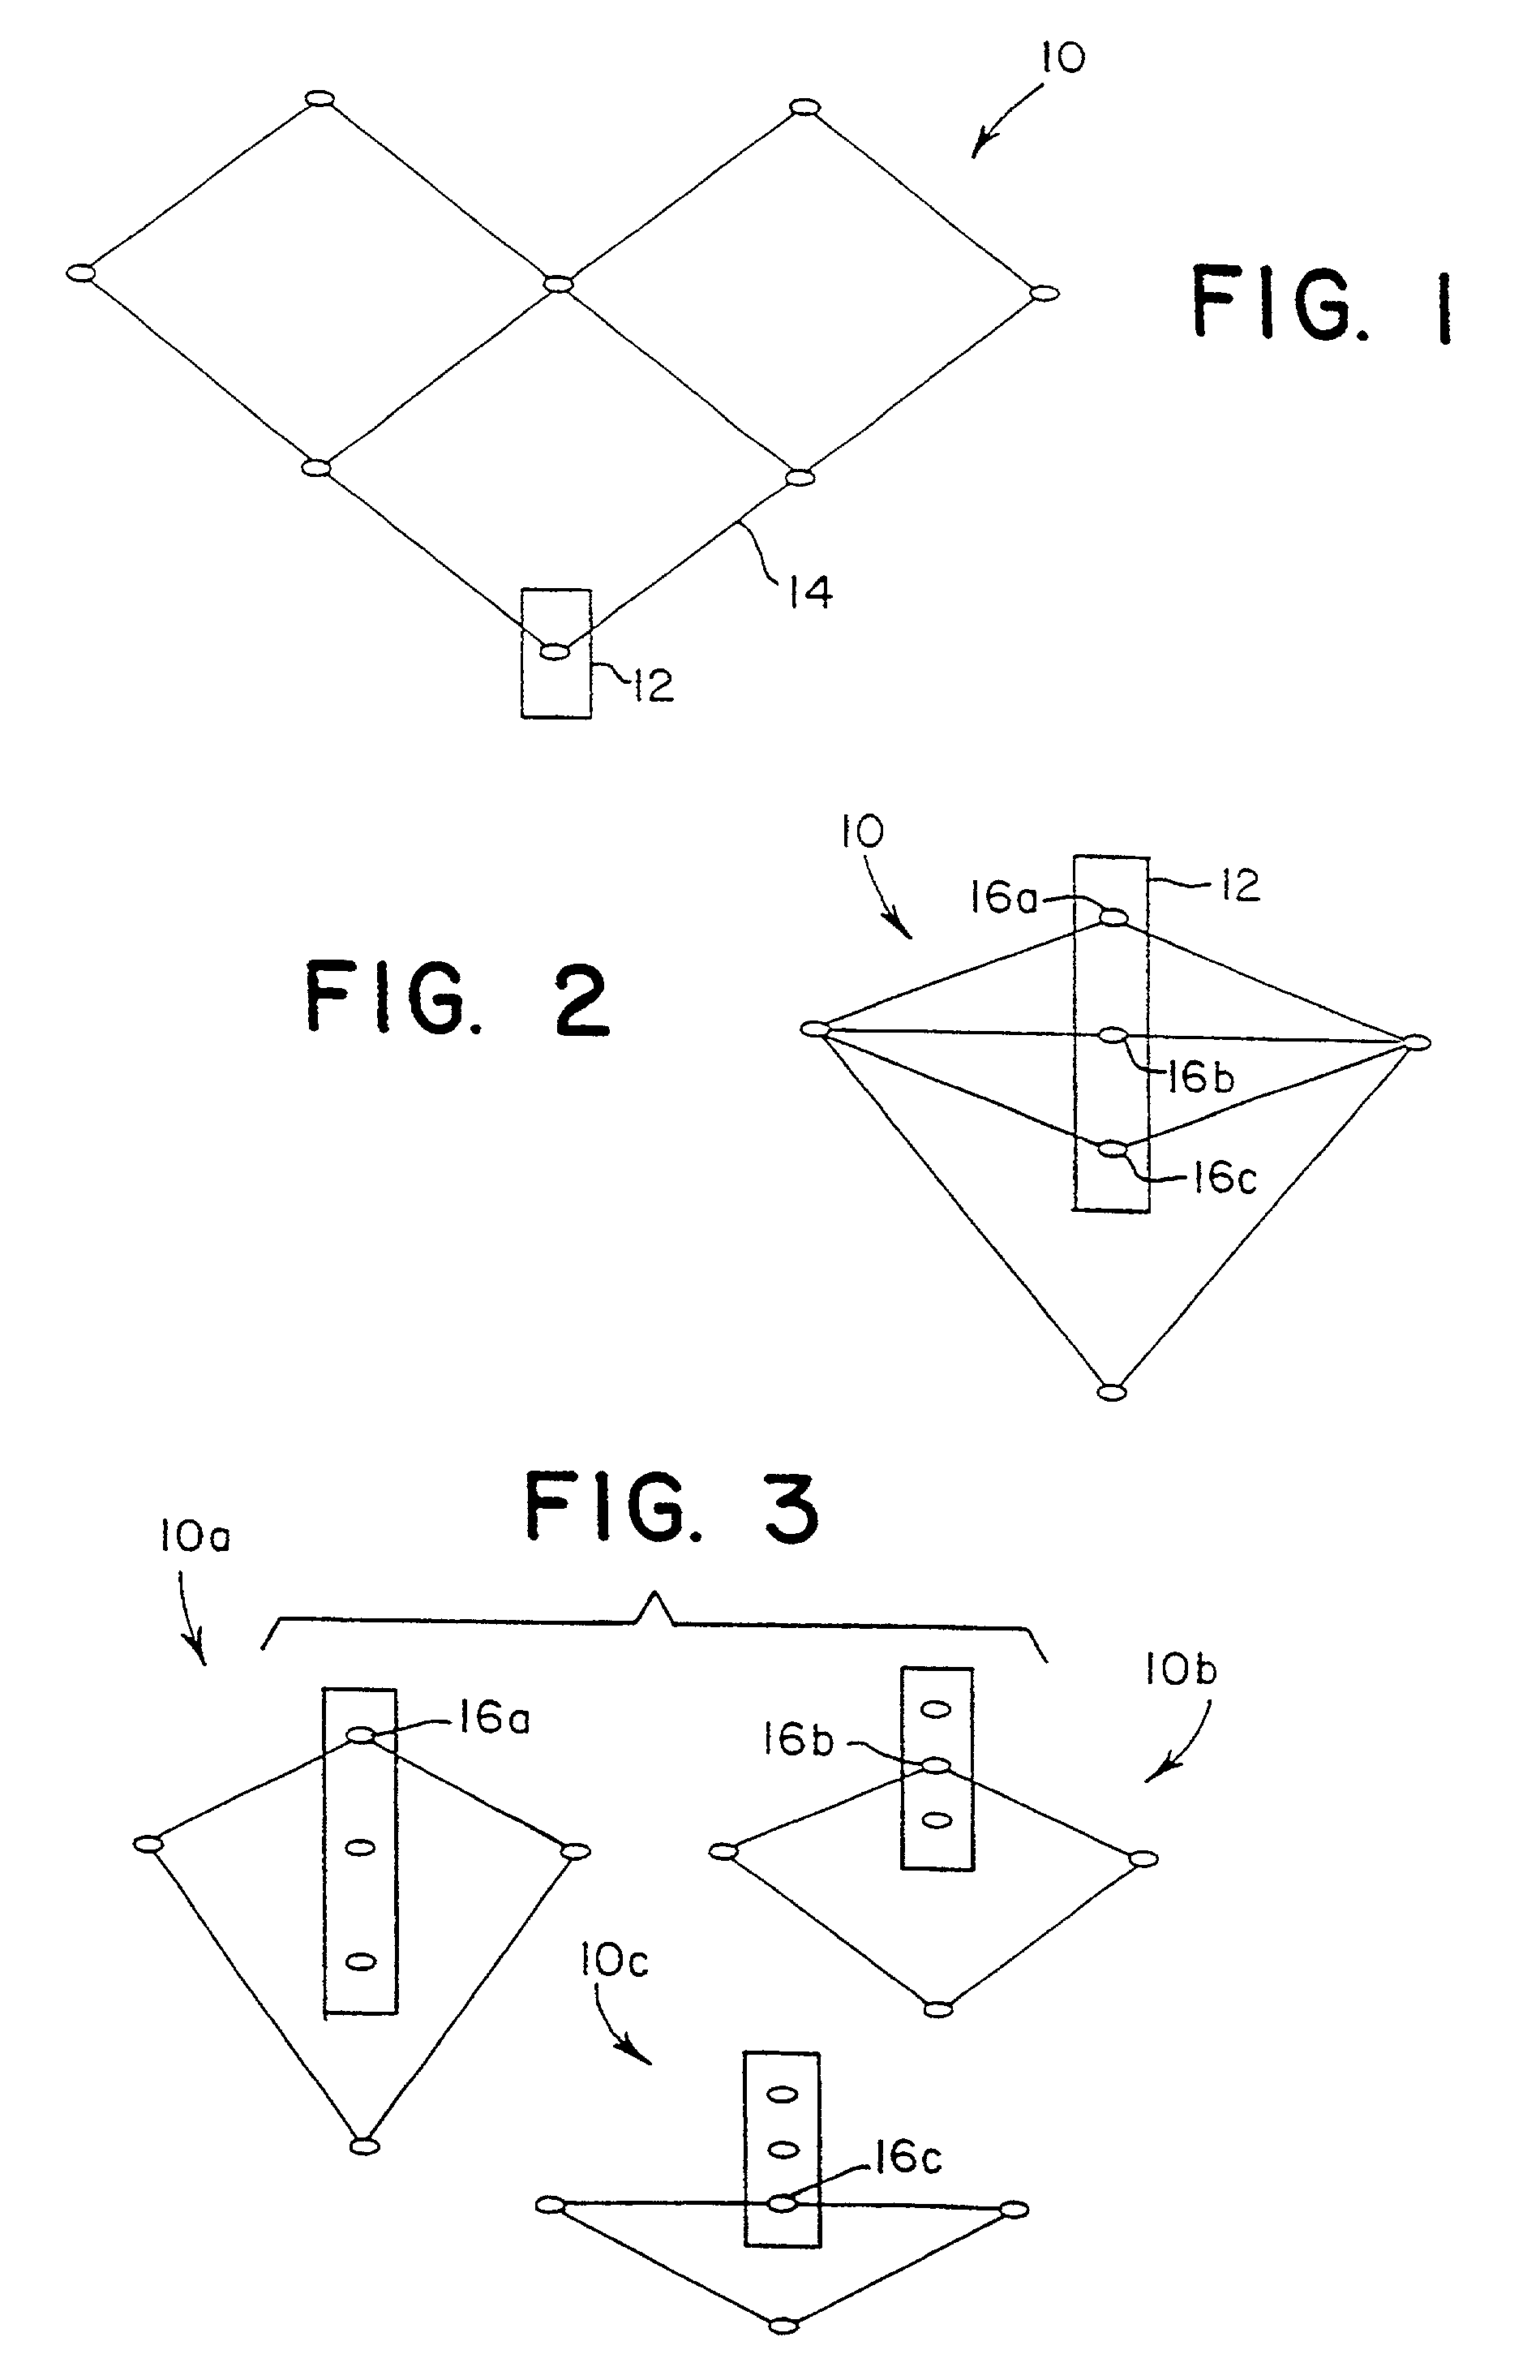 Method and system for resource requirement planning and generating a production schedule using a uniform data model